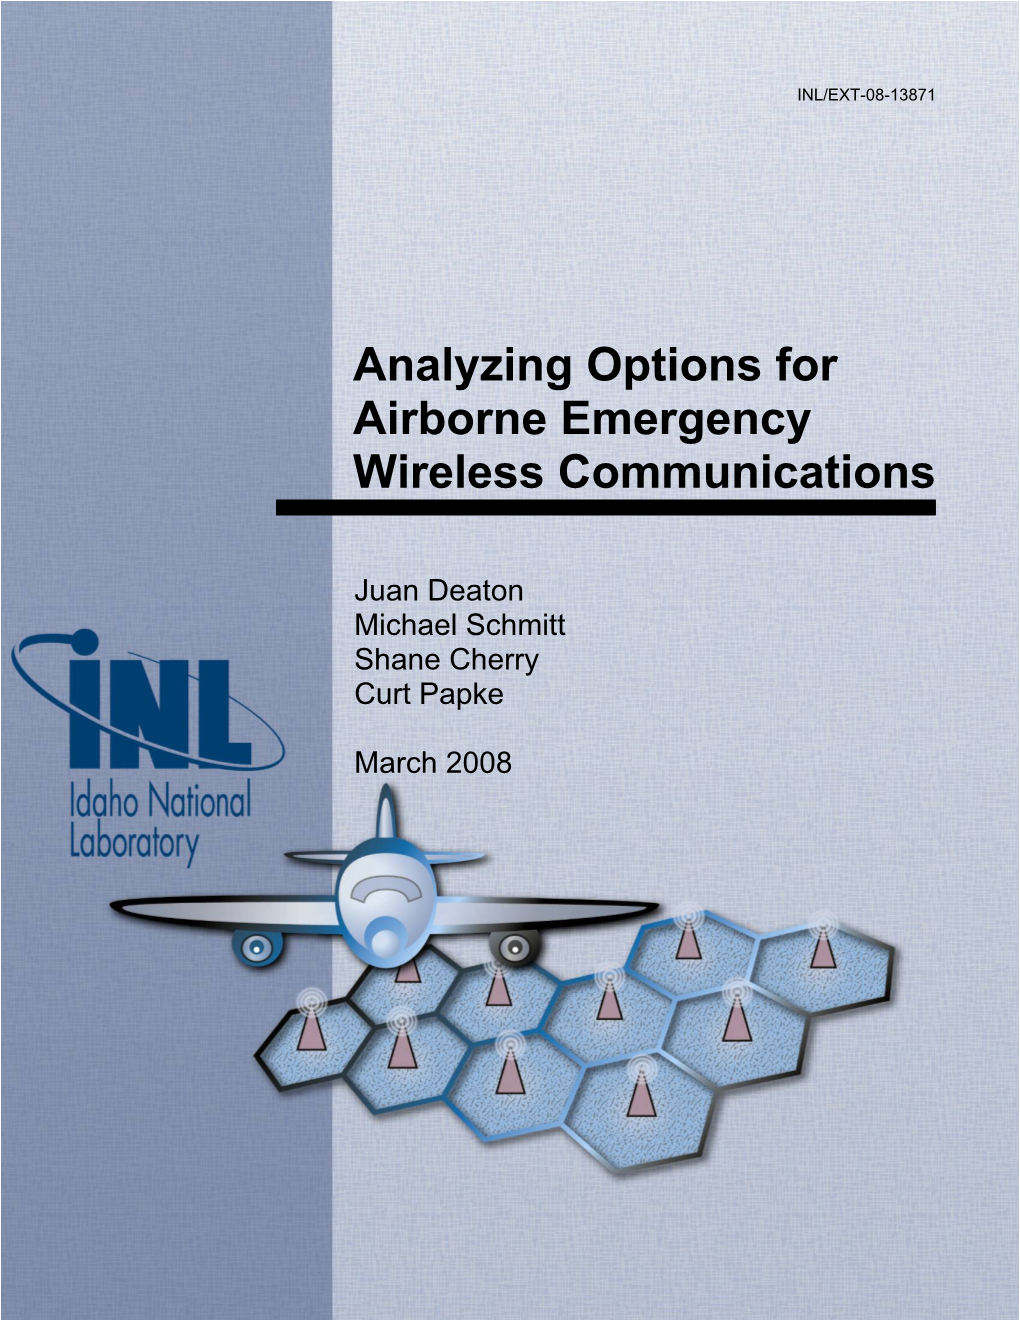 Analyzing Options for Airborne Emergency Wireless Communications